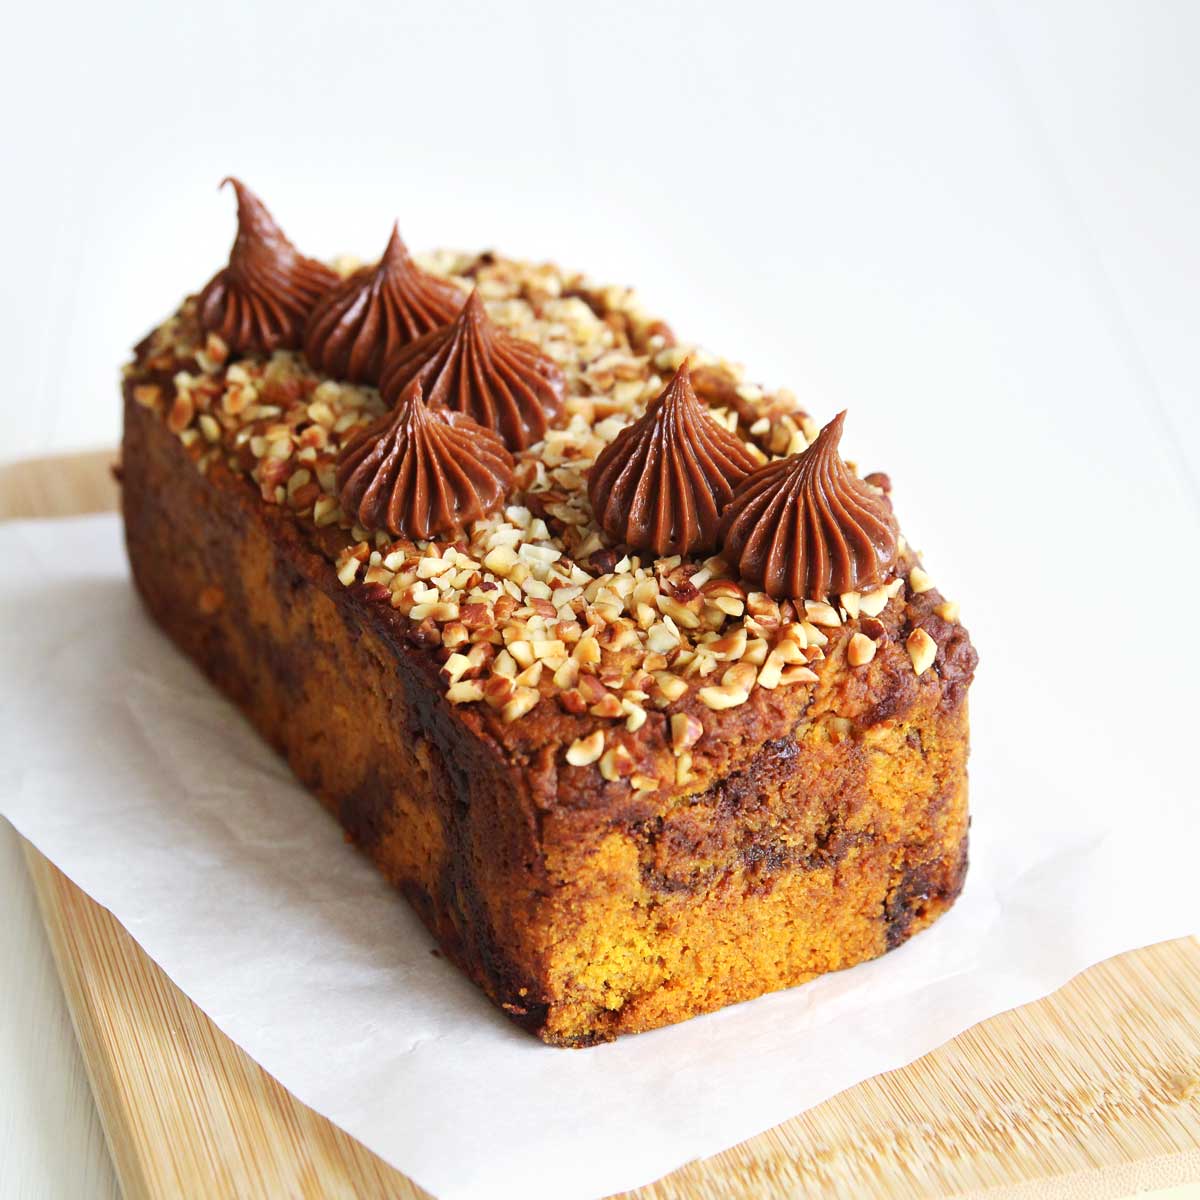 Nutella Marbled Chocolate Pumpkin Bread (No Eggs Required!) - Sweet Potato Swiss Roll Cake